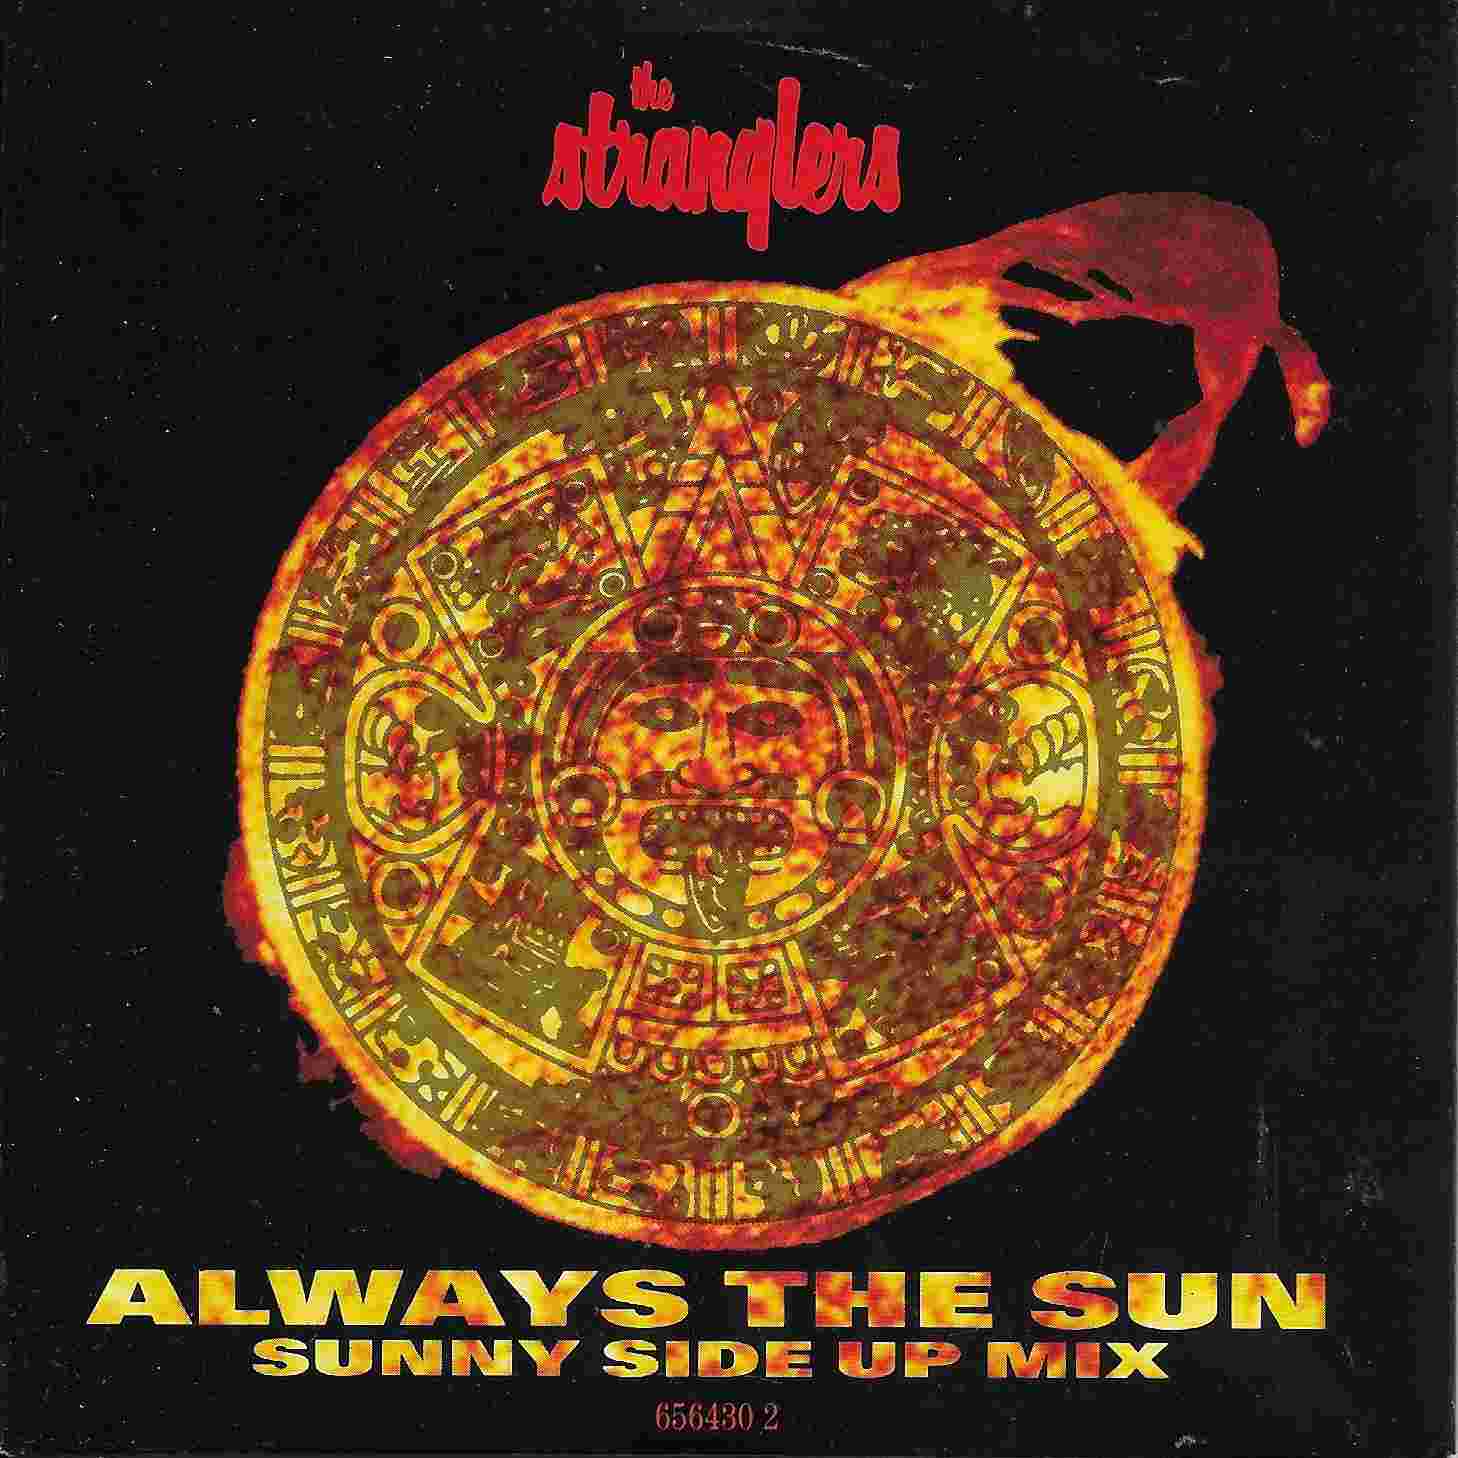 Picture of Always the Sun (Sunny side up mix) by artist The Stranglers from The Stranglers cdsingles